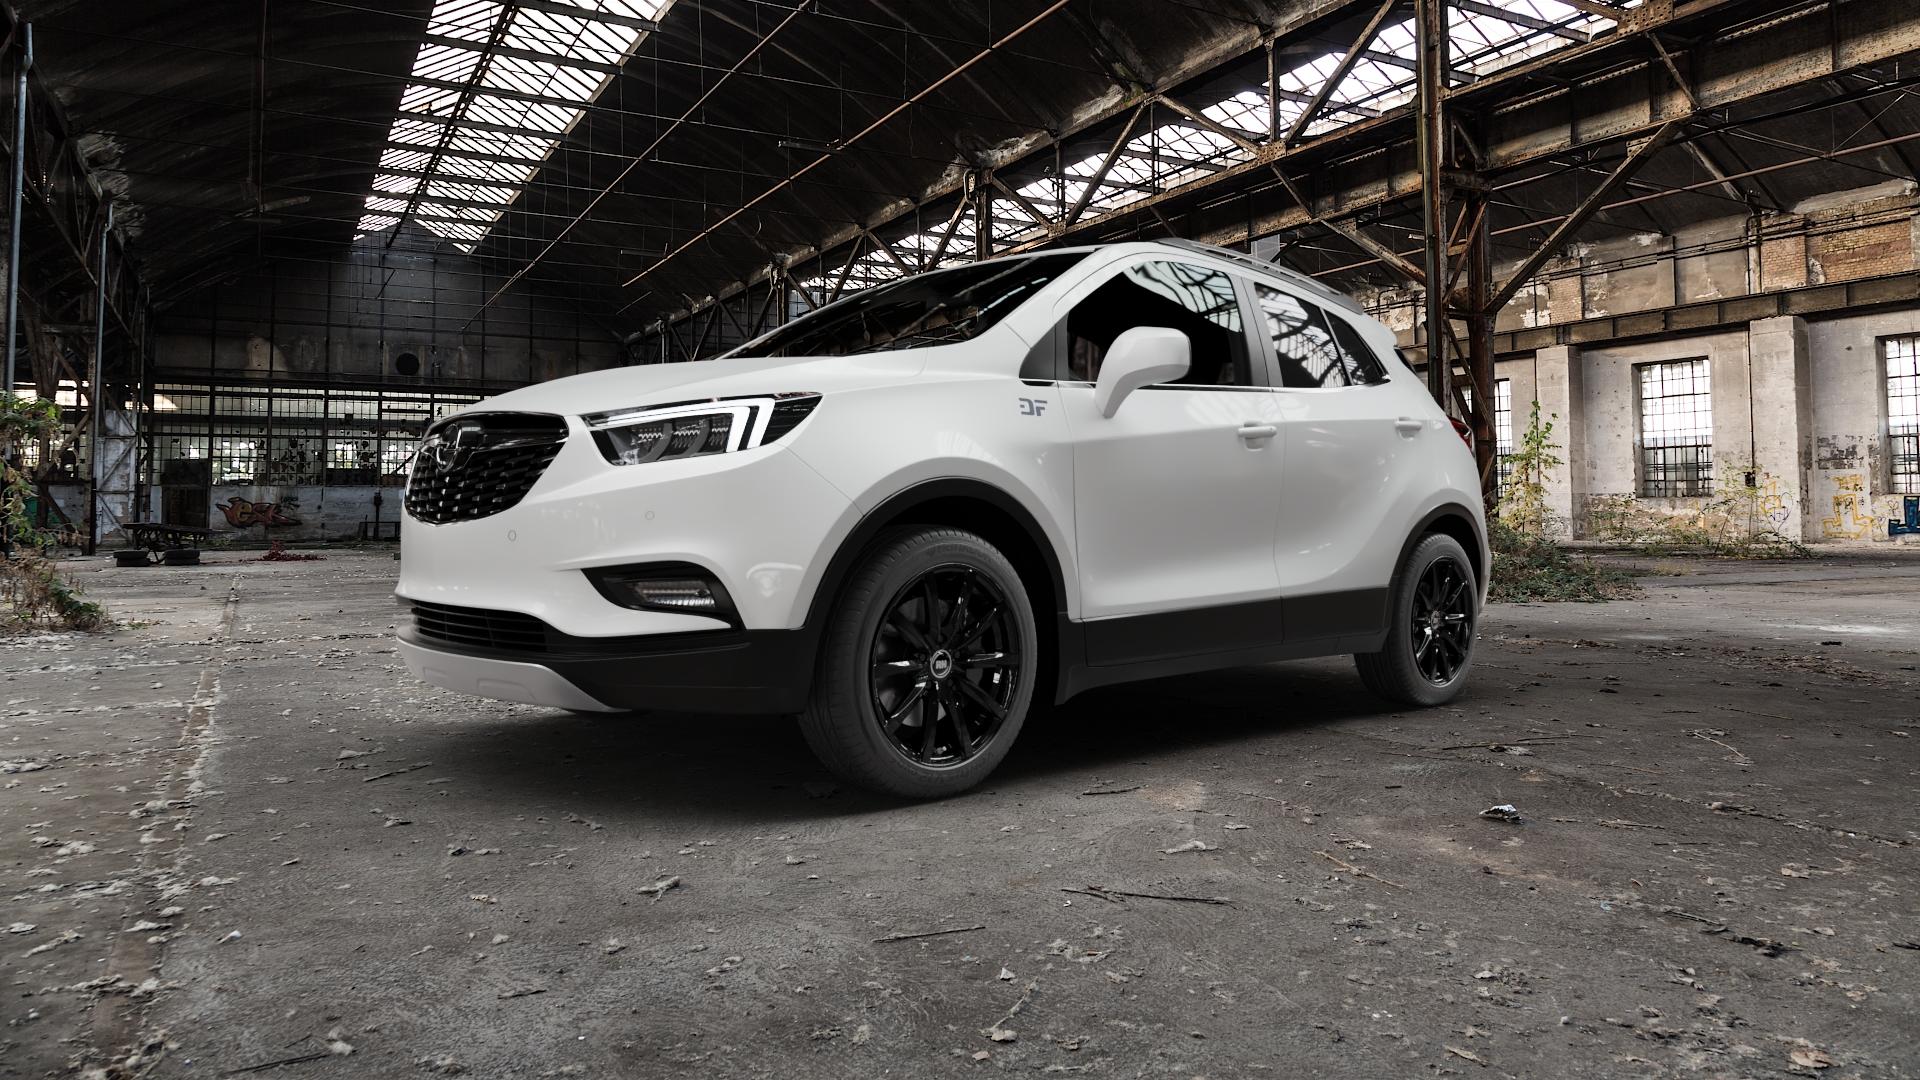 Opel Mokka X Type J-A 1,4l Turbo 112kW 4WD (152 hp) Wheels and Tyre  Packages | velonity.com